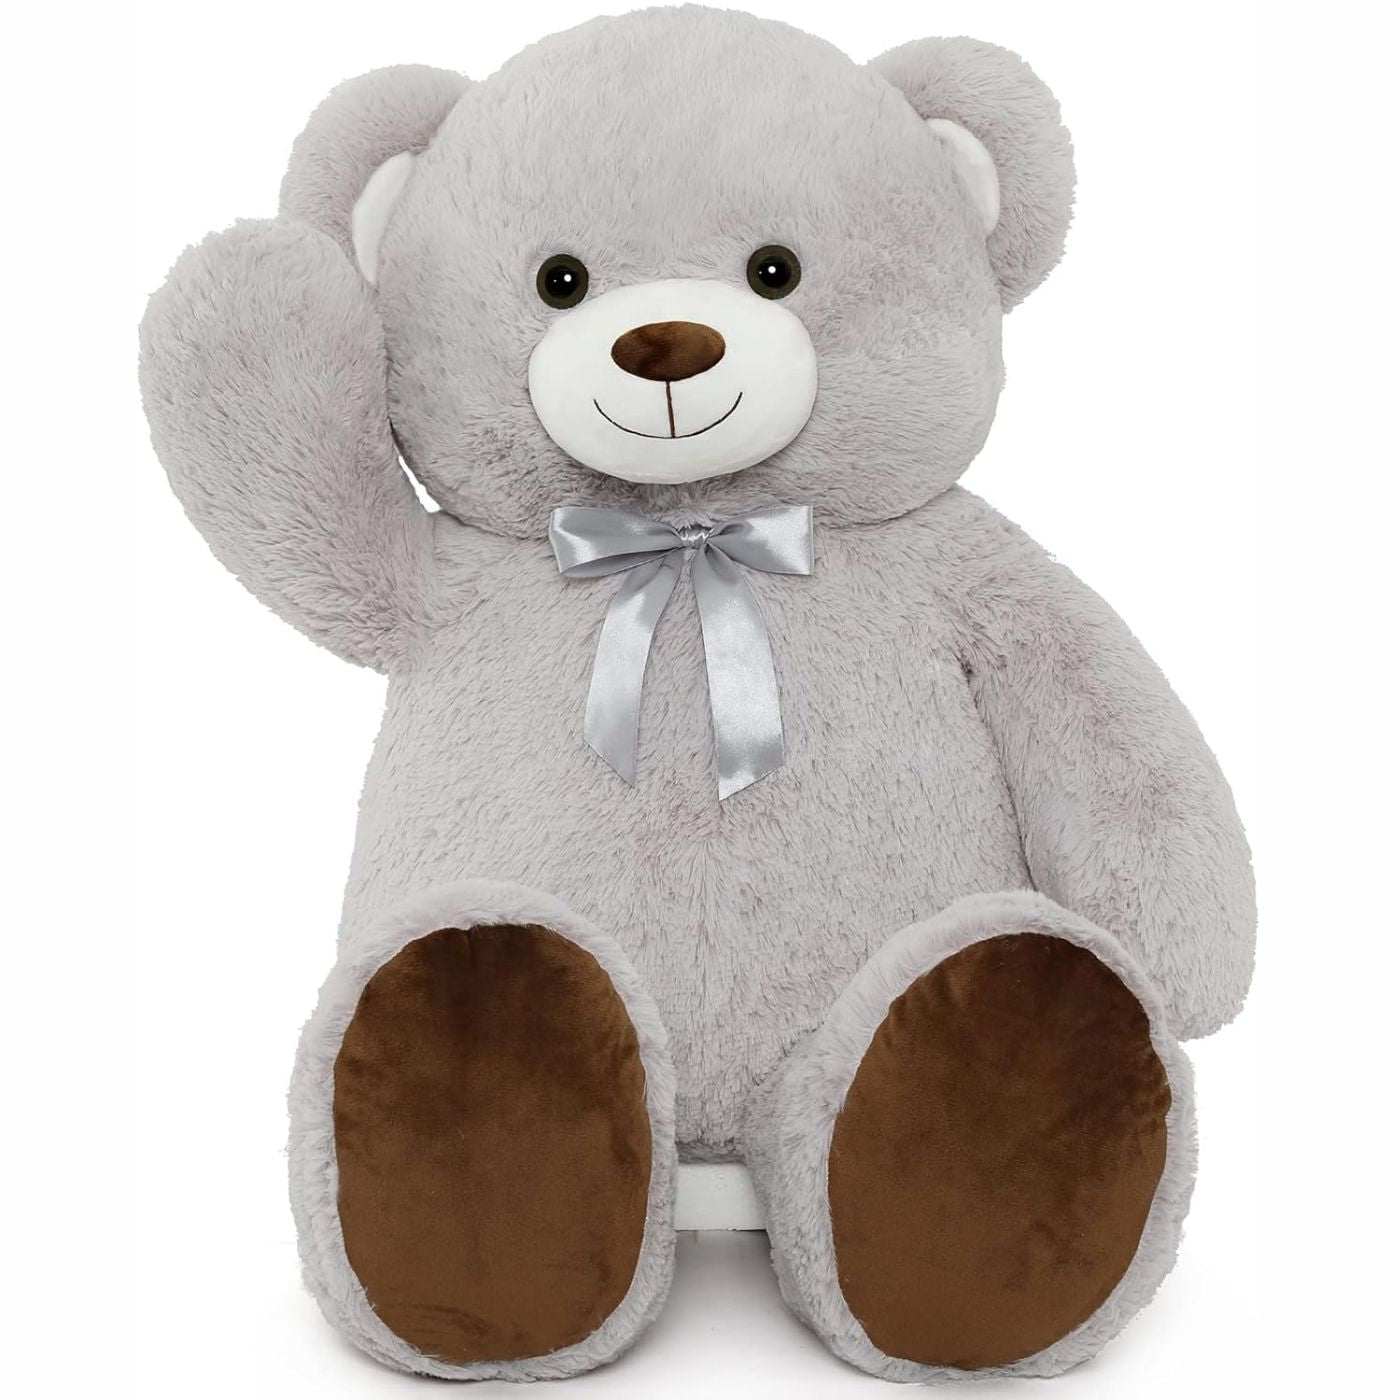 Giant Teddy Bear Stuffed Toy, Multicolor, 41 Inches